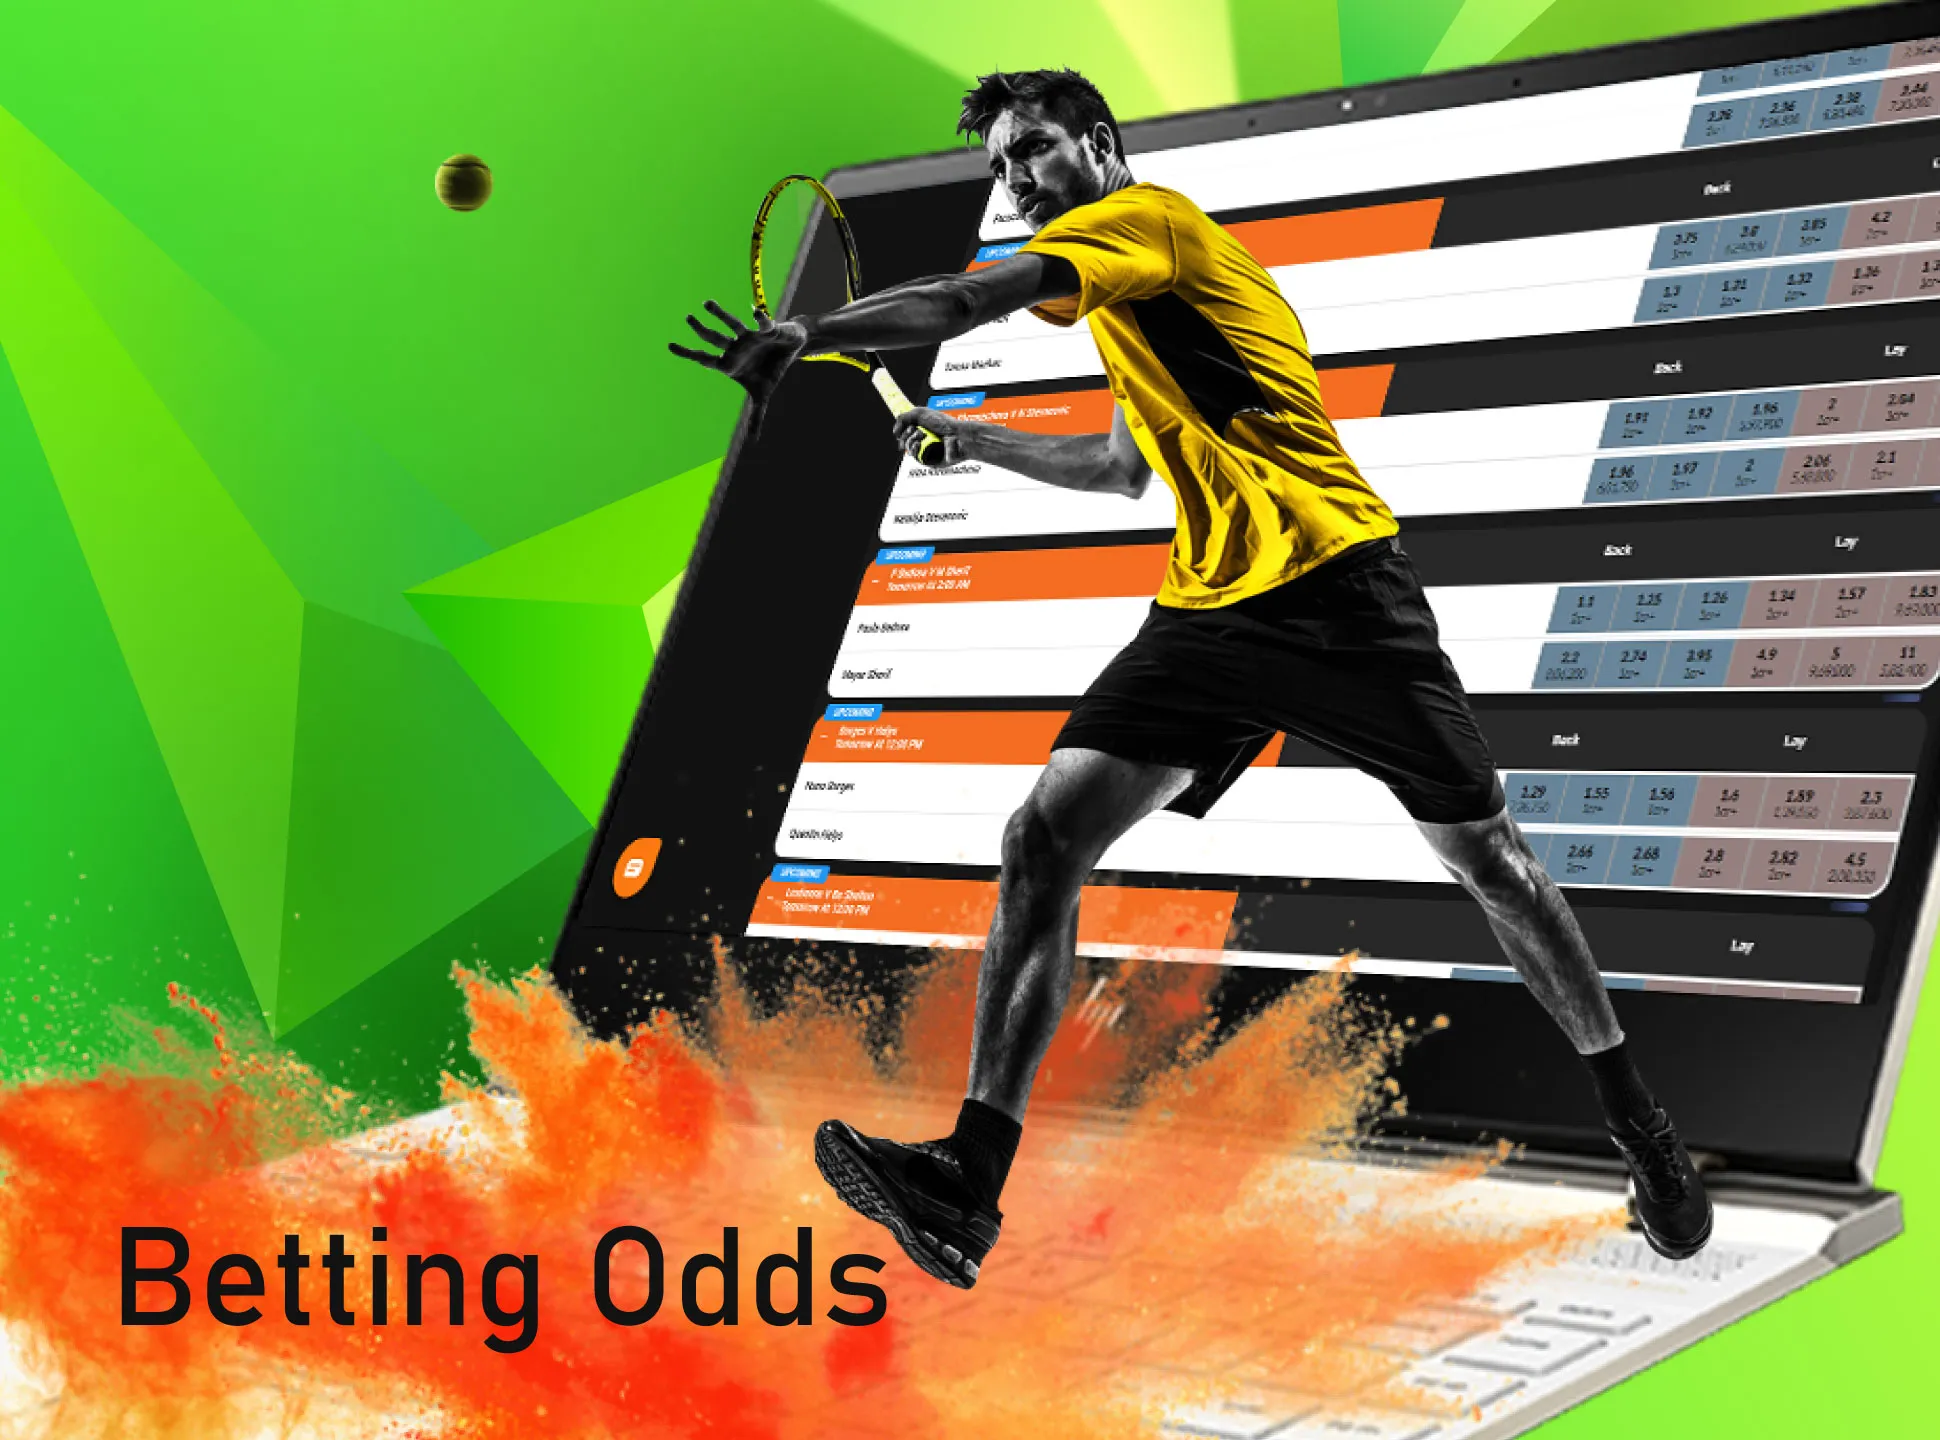 Fairplay gives pretty high betting odds on the tennis events.